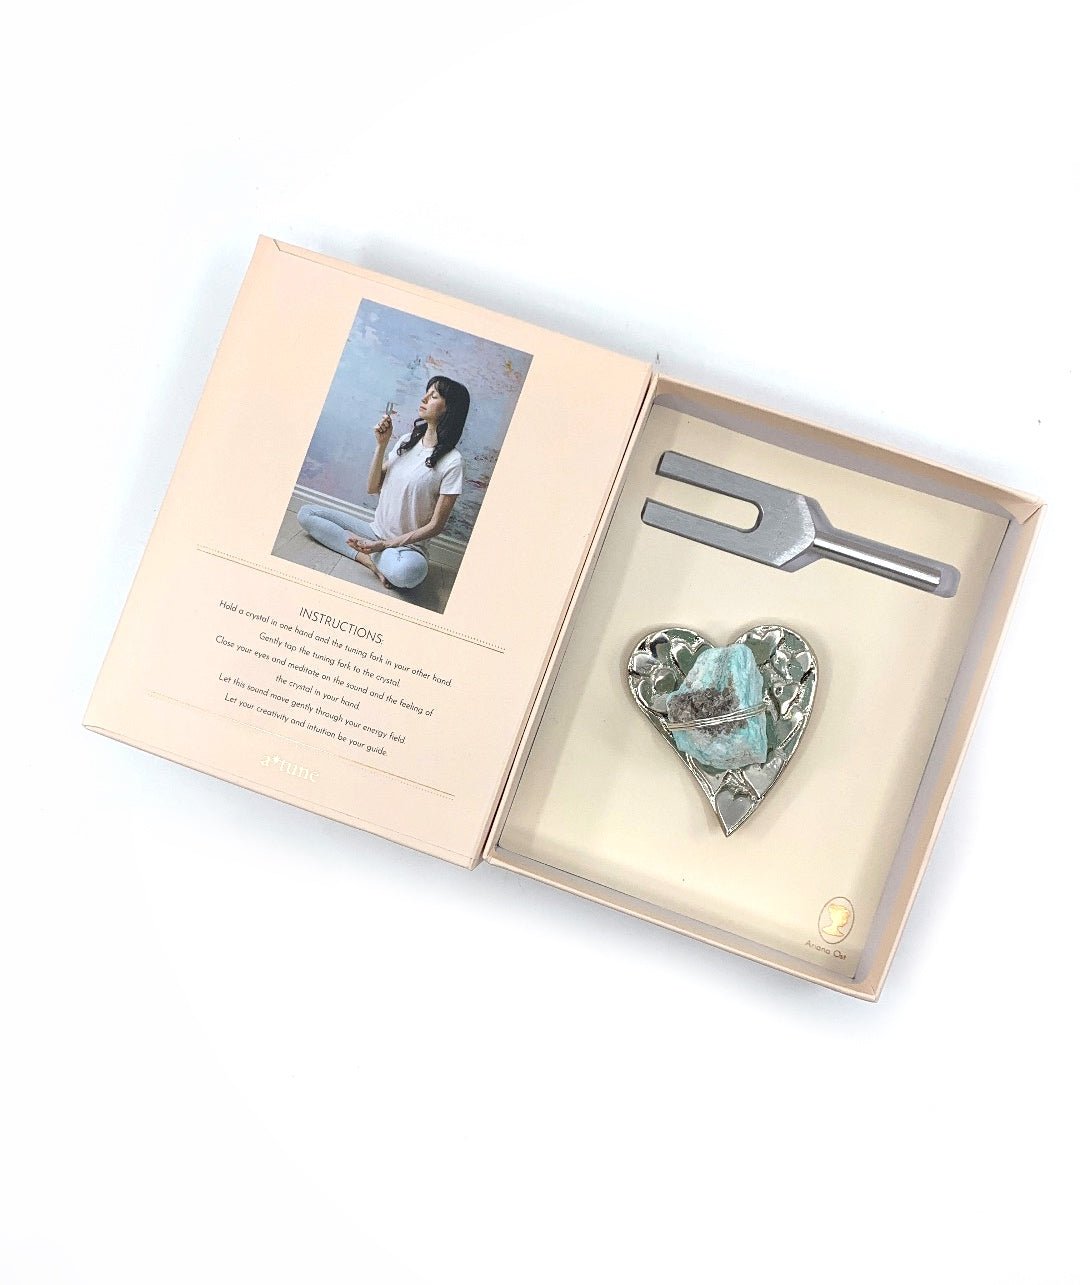 Sound Healing Crystal Kit - Tuning Fork and Heart Crystal Dish Set - Amazonite - Ariana Ost